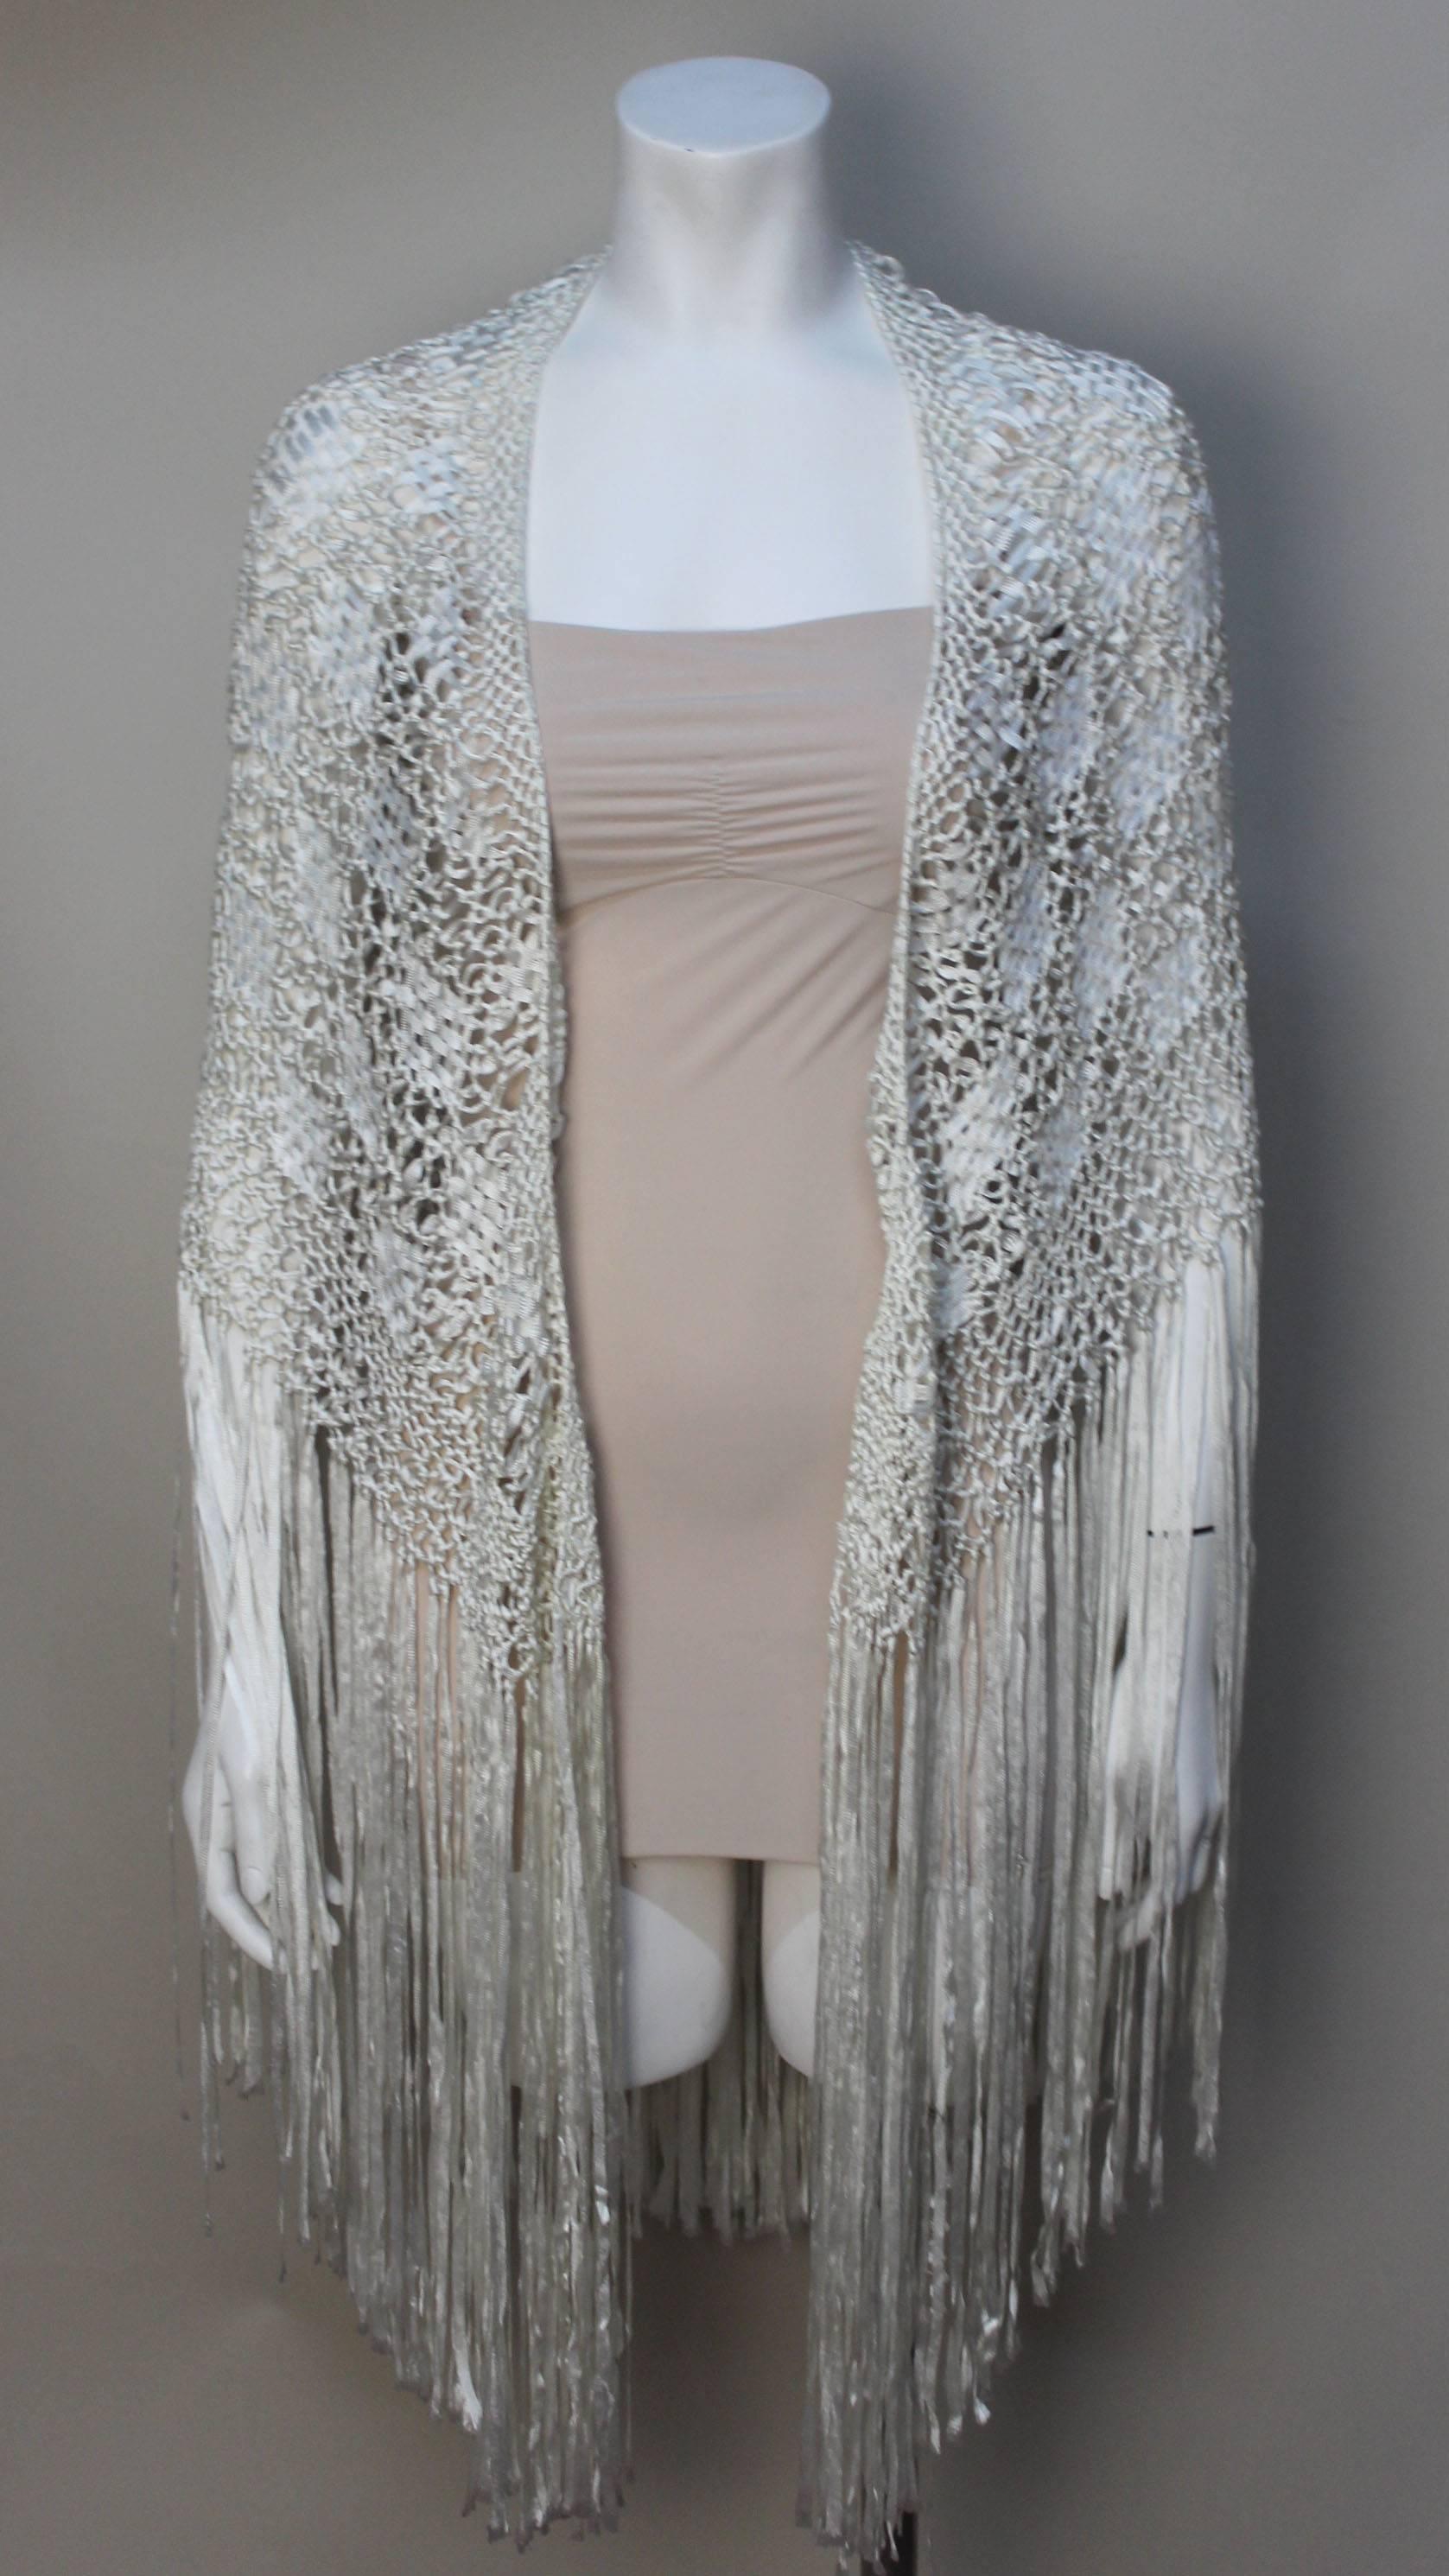 This white vintage ribbon shawl is beautifully rendered. The crochet is in an intricate pattern with long silky fringe. It wraps beautifully over the body or can be incorporated in home decor. 